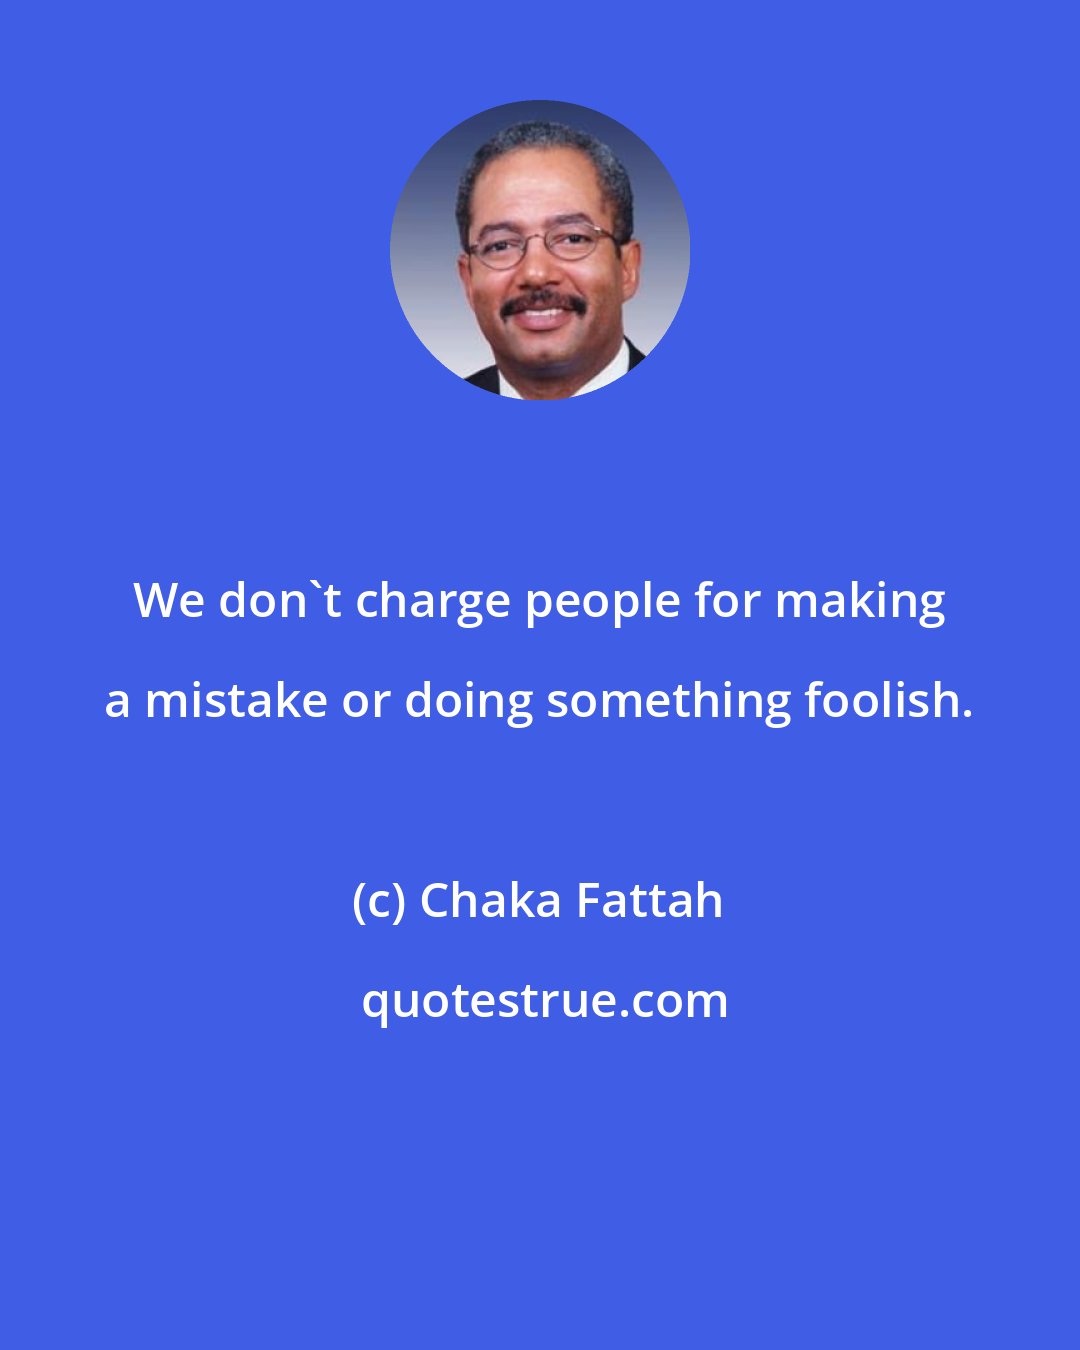 Chaka Fattah: We don`t charge people for making a mistake or doing something foolish.